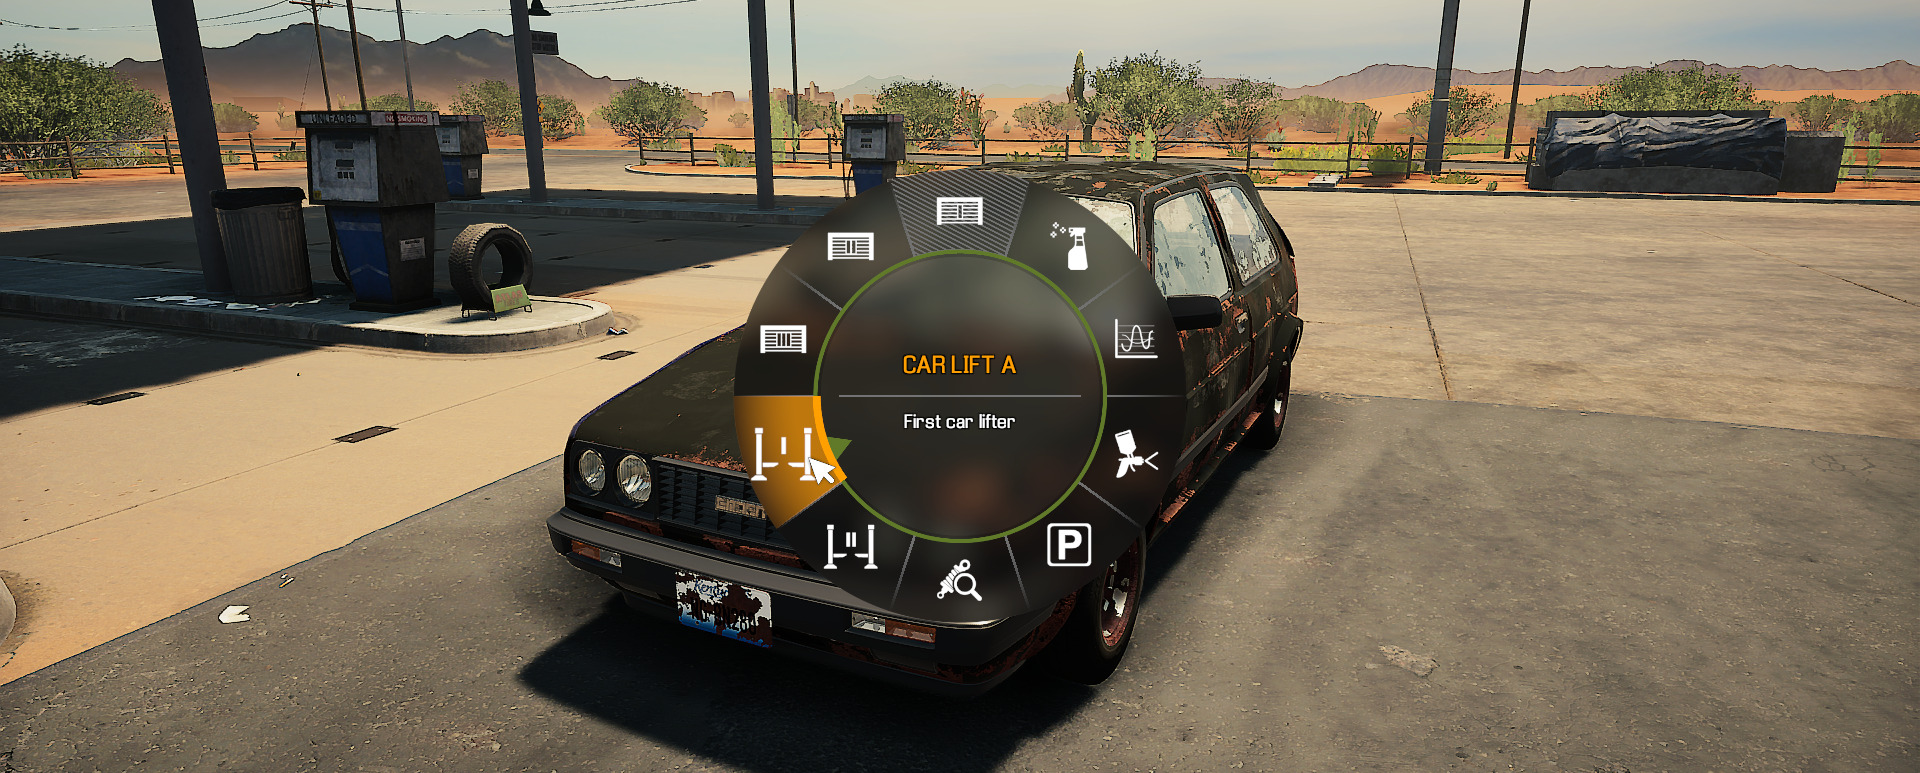 A screenshot showing the Car Lift A command on the Pie Wheel in Car Mechanic Simulator